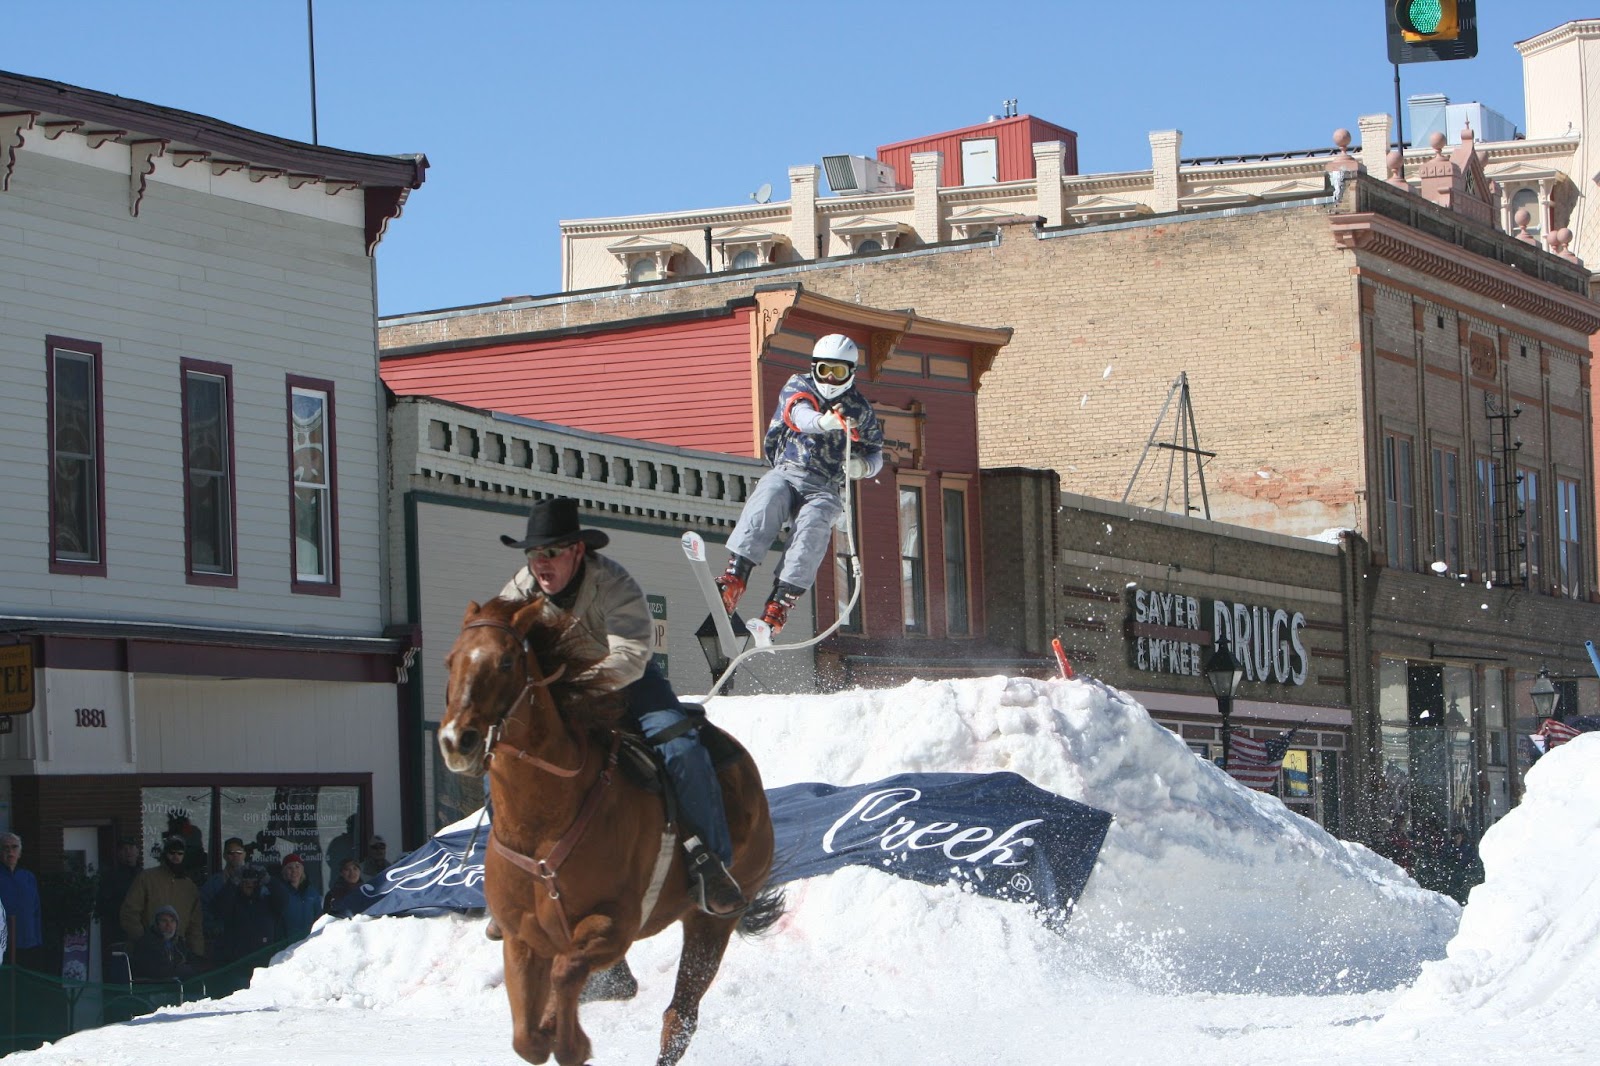 A person on skis being pulled by a horse in a 2009 Skijoring event in Leadville, Colorado. Photo by Kaila Angello